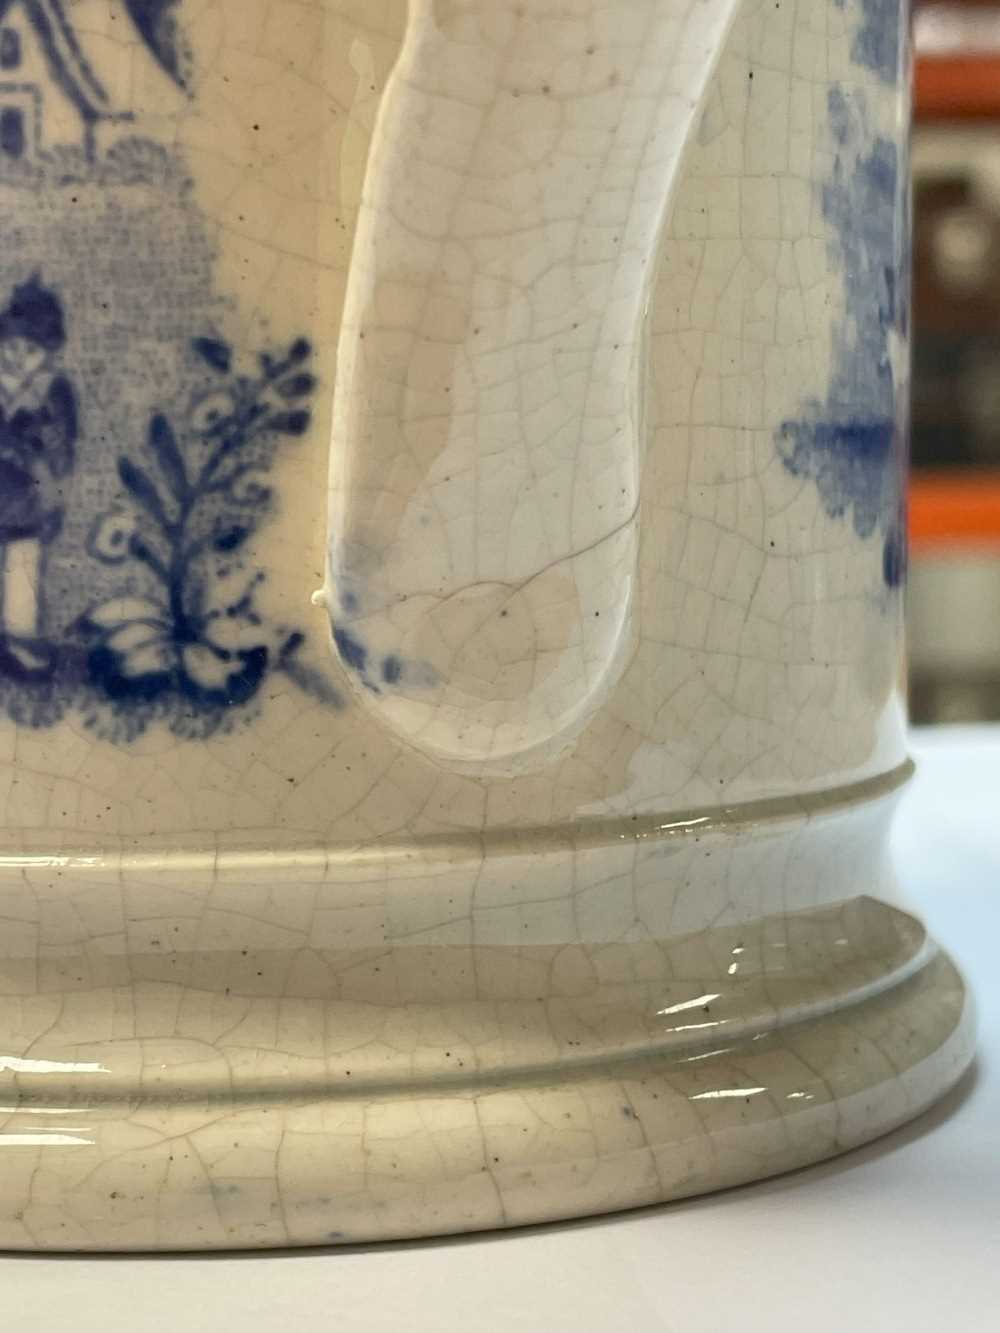 SWANSEA 'NAMED' BLUE & WHITE TANKARD printed in black with cartouche 'John Price Llanwrtyd' reserved - Image 4 of 14